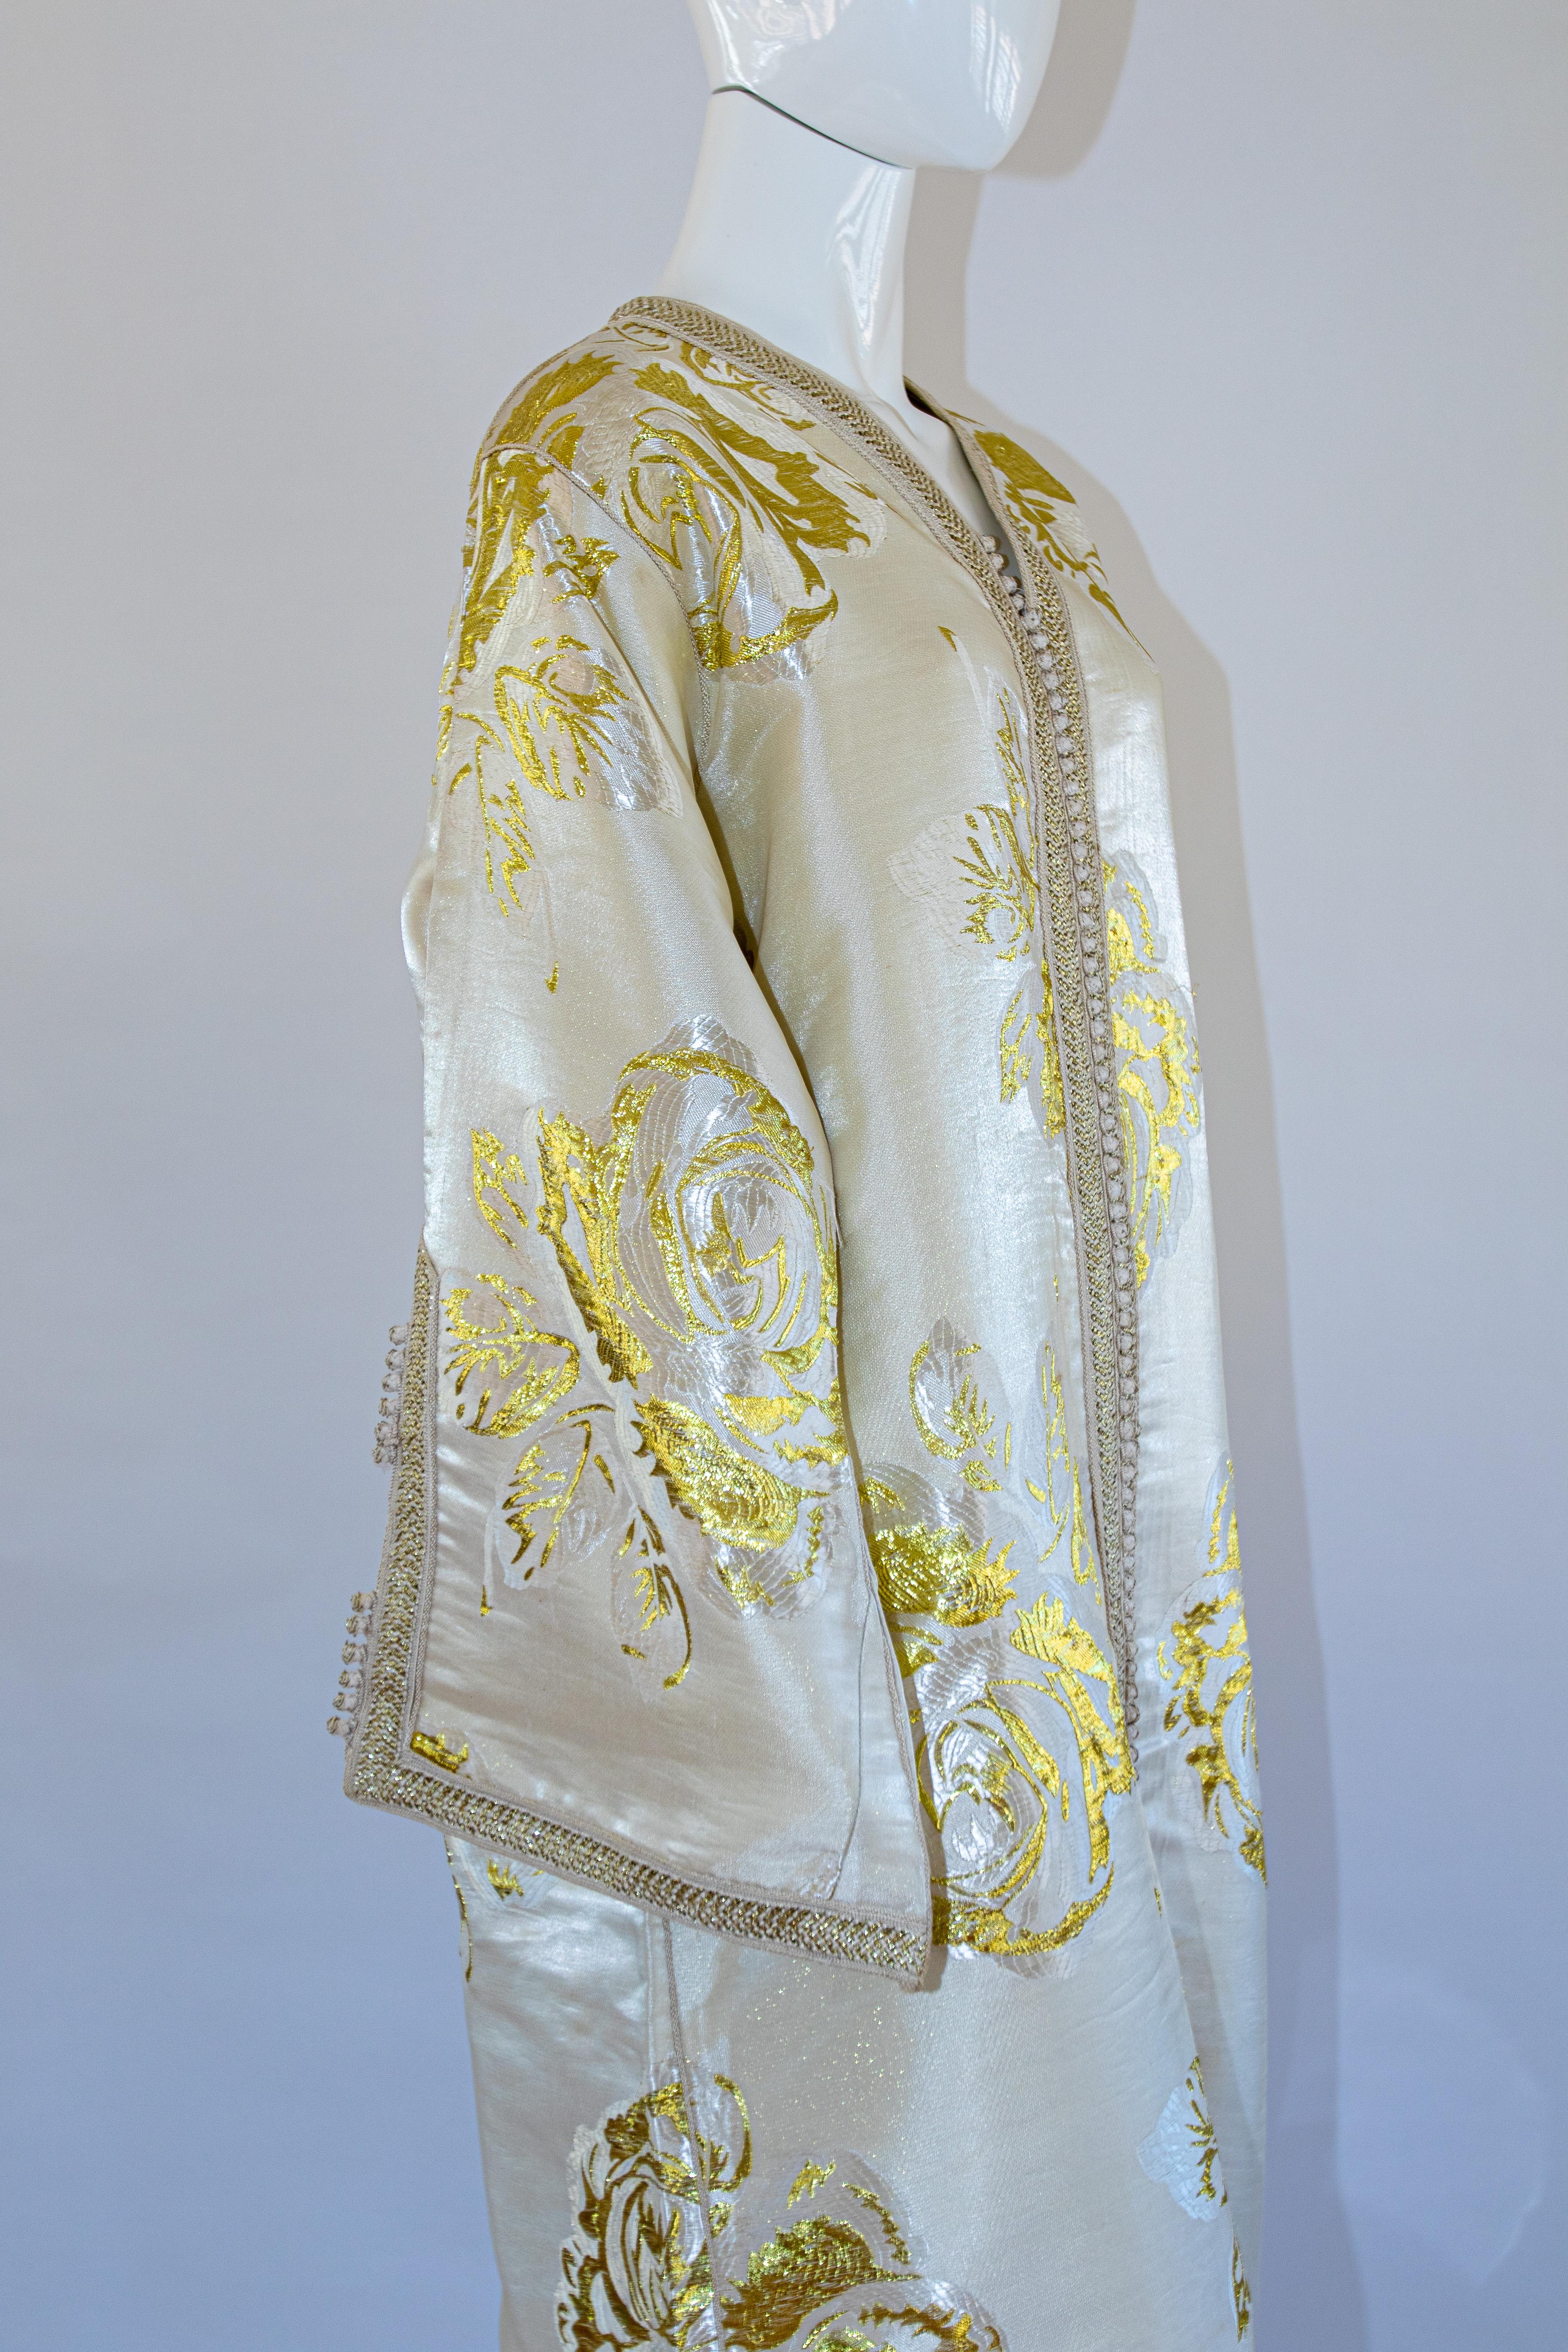 Vintage Moroccan Caftan White and Gold Metallic Floral Brocade For Sale 8